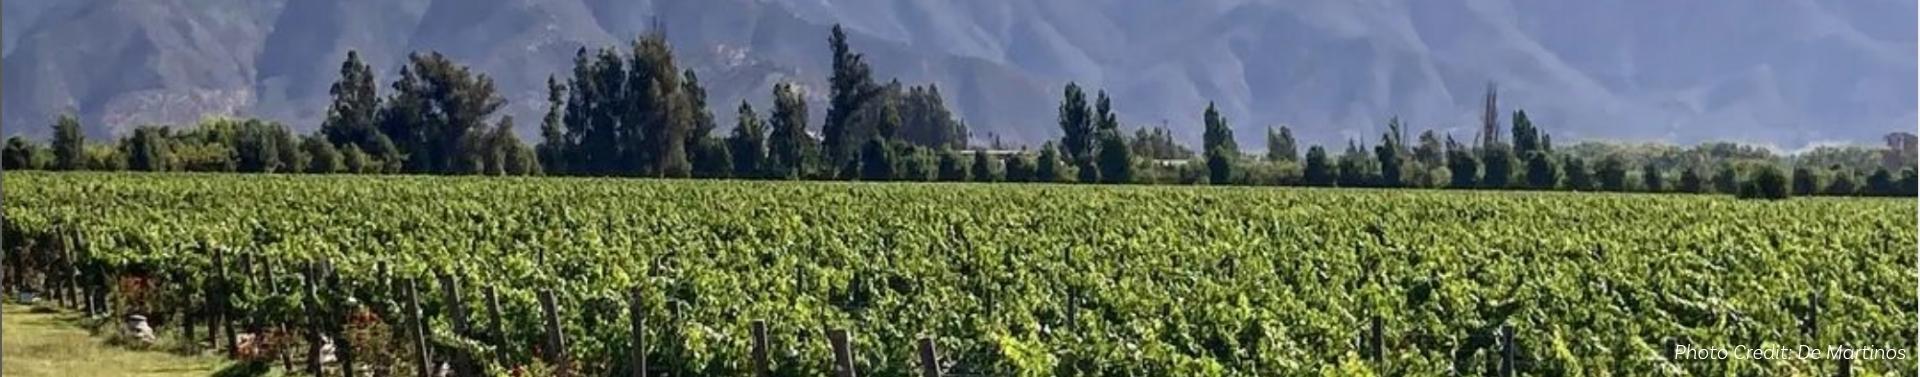 Maipo Valley